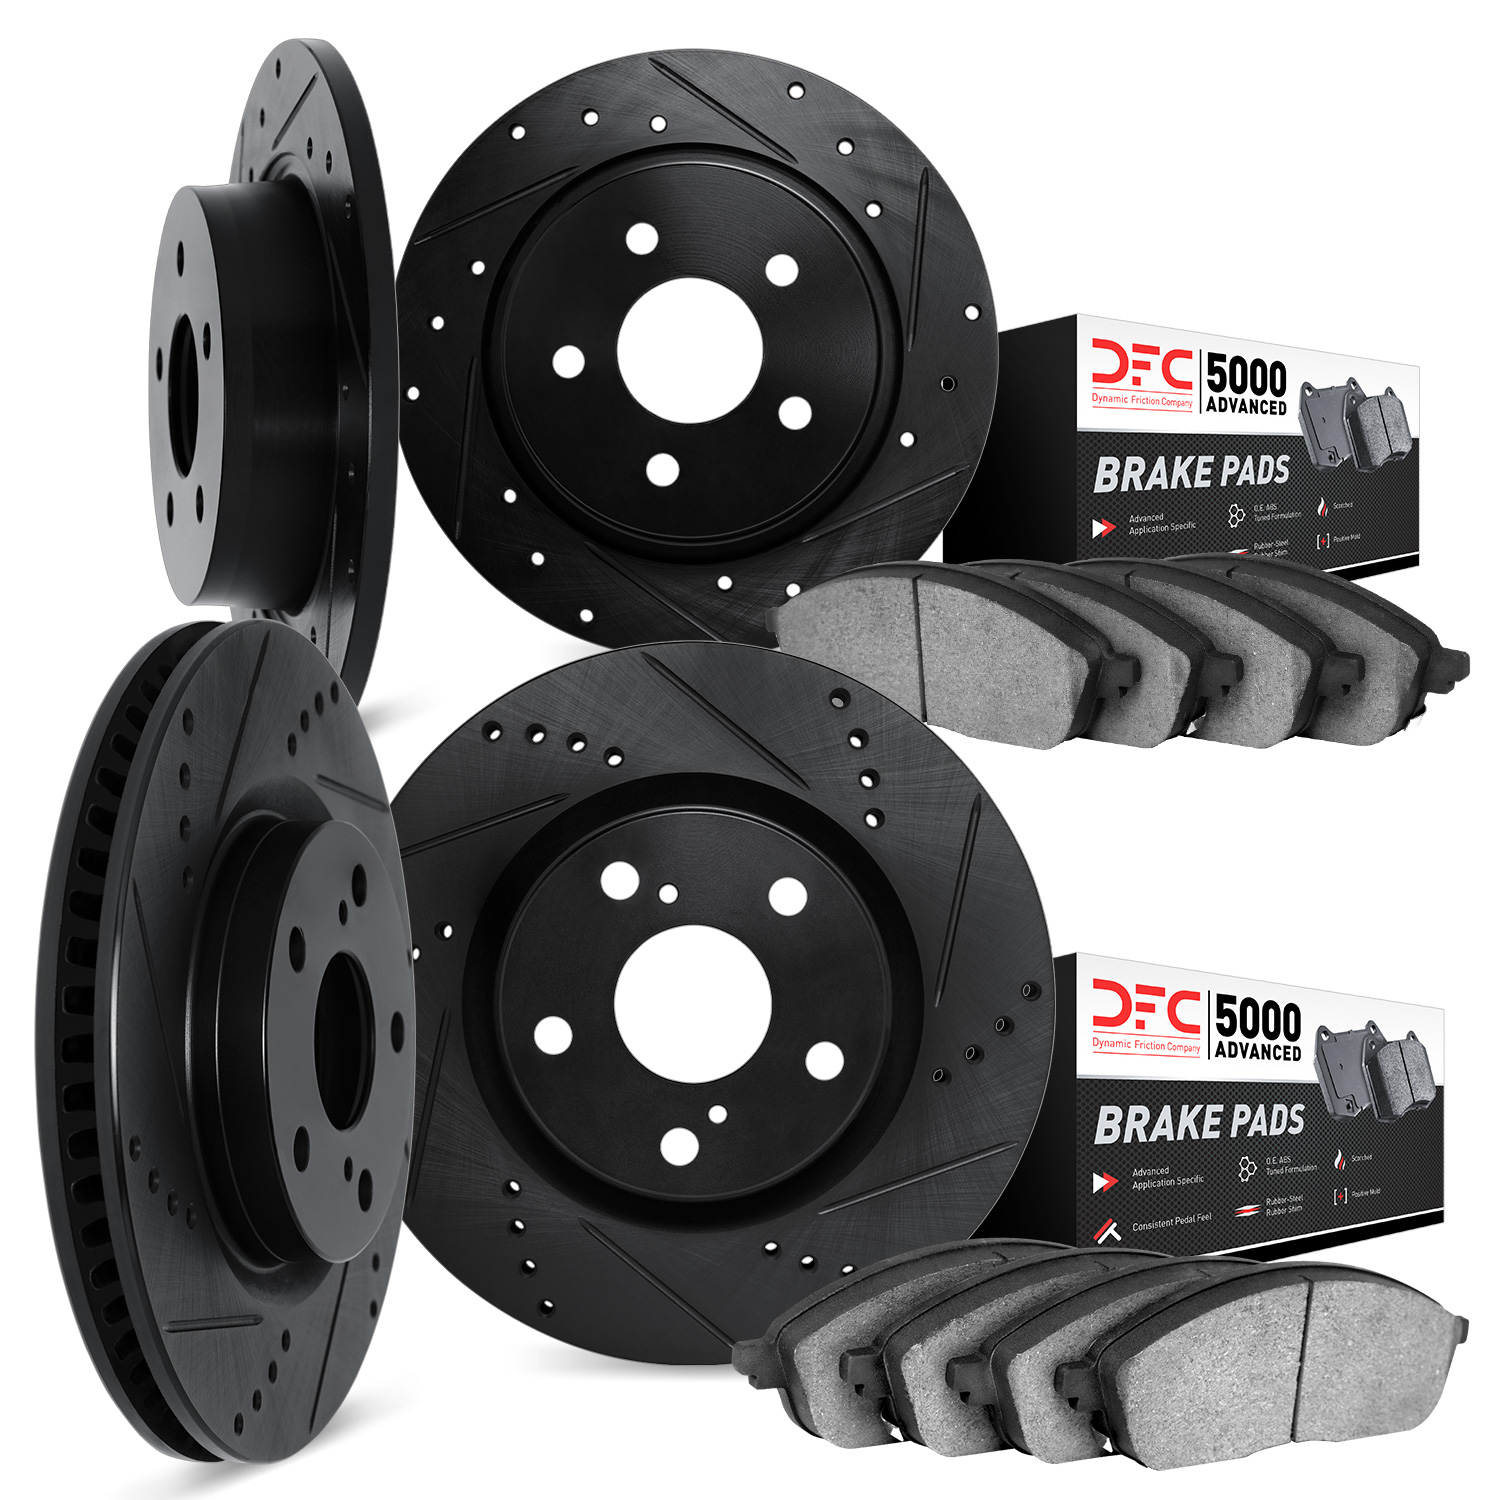 8504-59056 Drilled/Slotted Brake Rotors w/5000 Advanced Brake Pads Kit [Black], 2018-2020 Acura/Honda, Position: Front and Rear